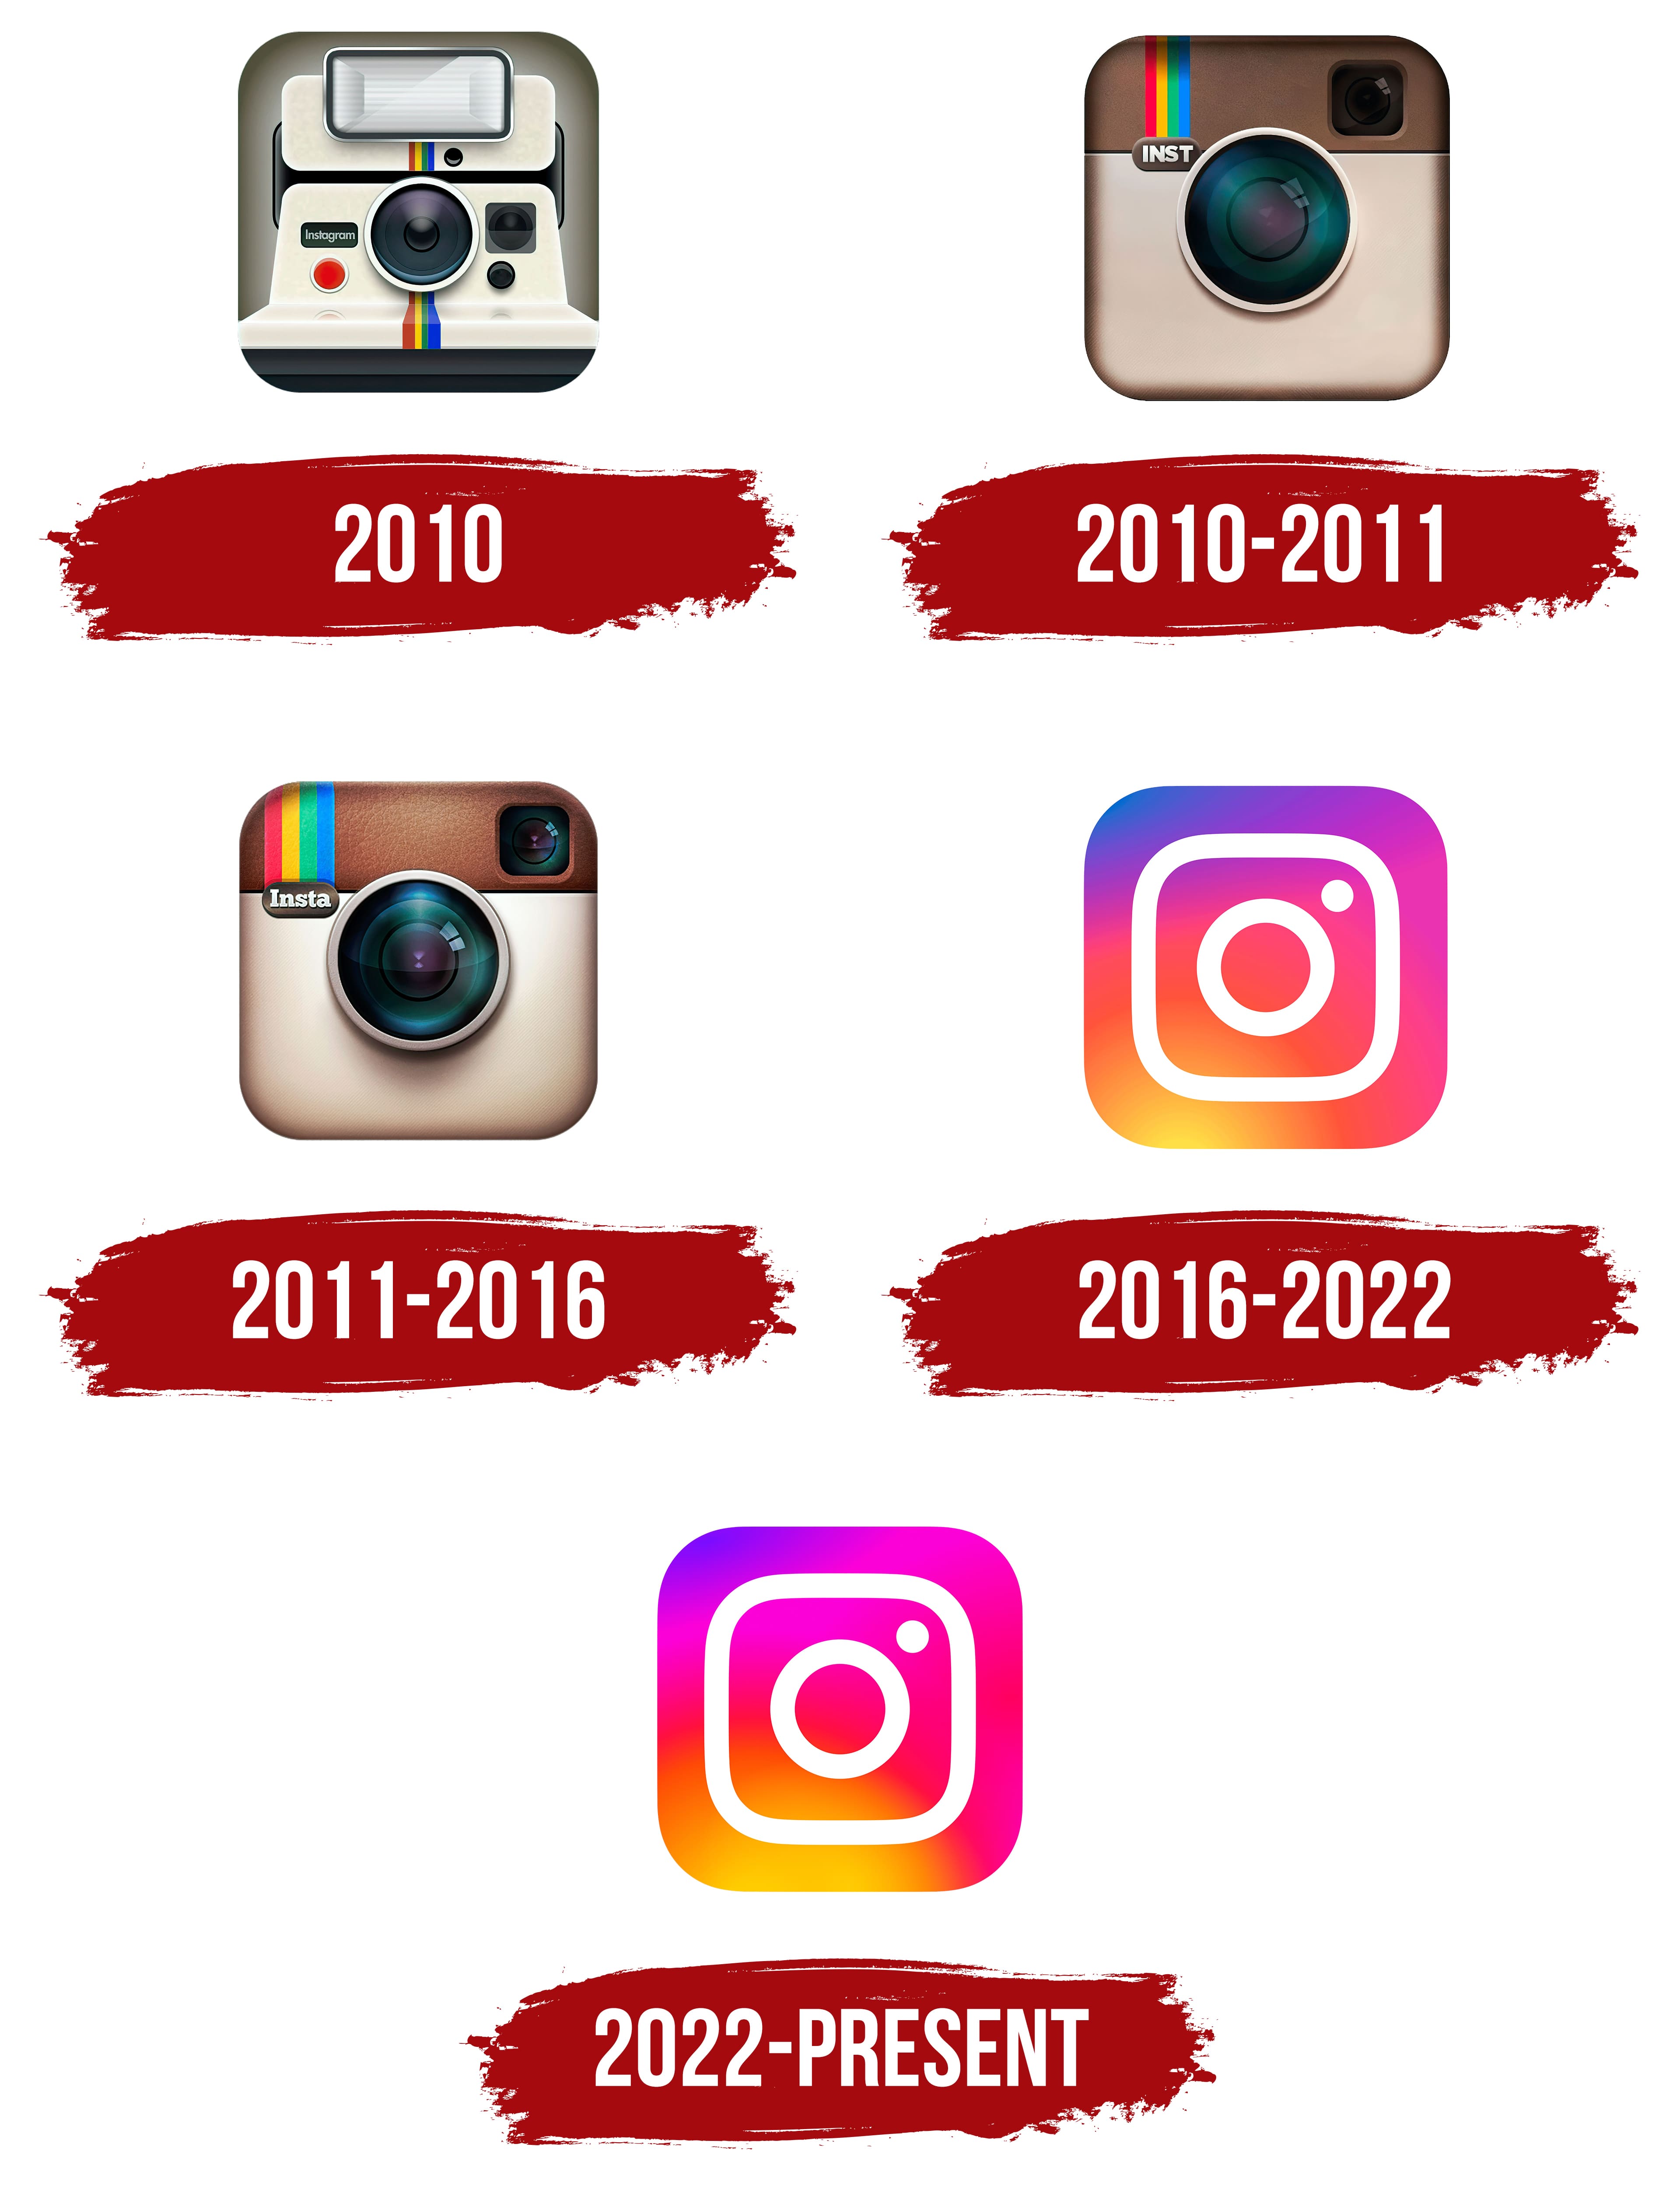 Instagram Logo, symbol, meaning, history, PNG, brand